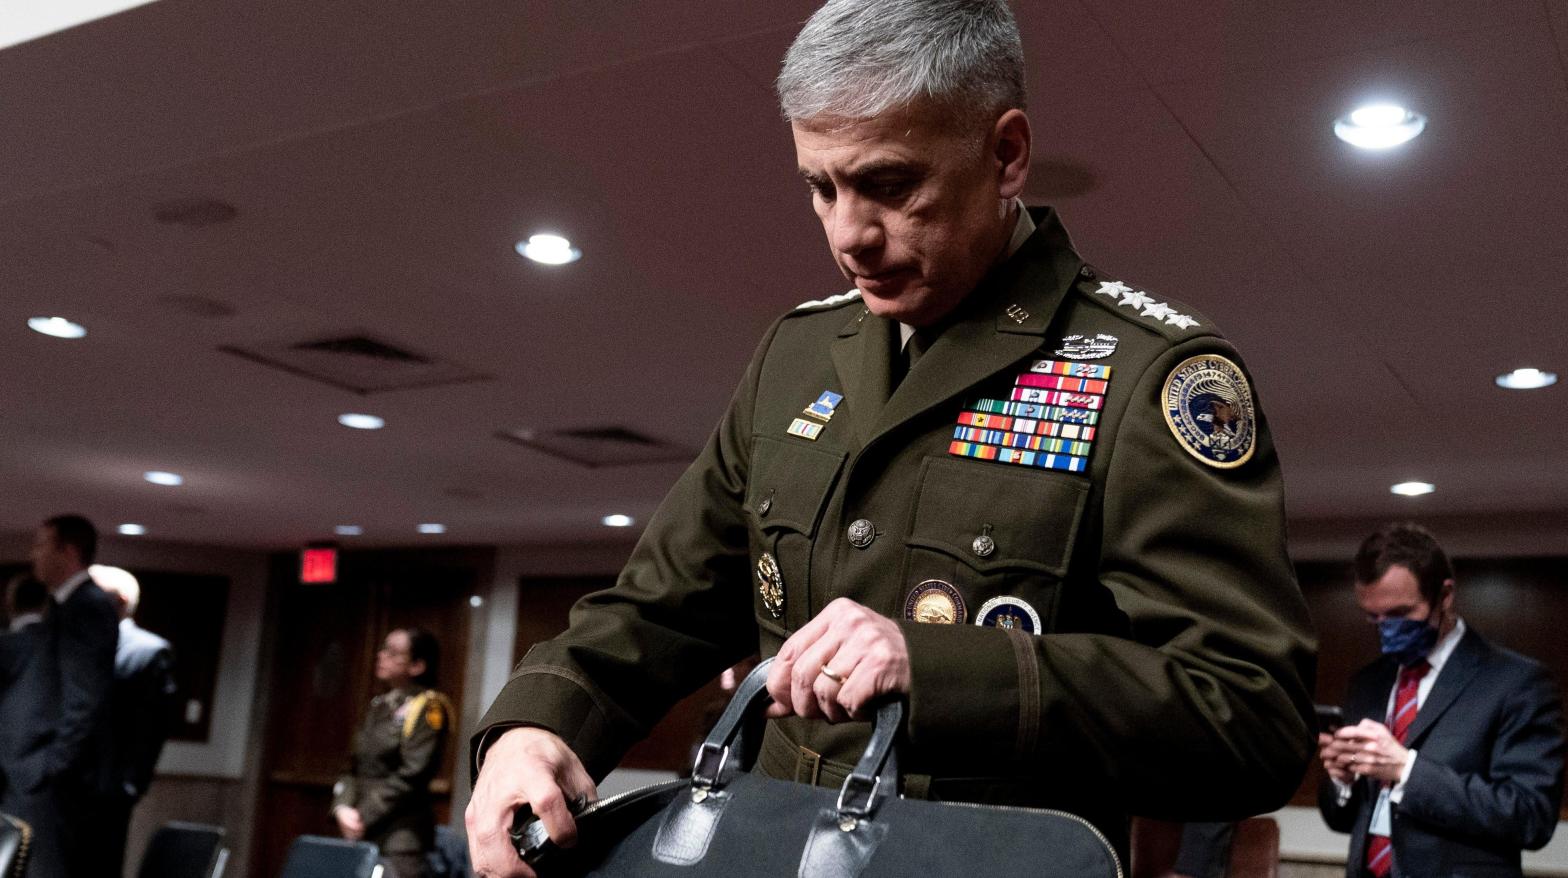 U.S. Cyber Command head, National Security Agency Director and Central Security Service Chief Gen. Paul Nakasone arrives for a Senate Armed Services hearing on Capitol Hill in Washington, Tuesday, April 5, 2022. (Photo: Andrew Harnik, AP)